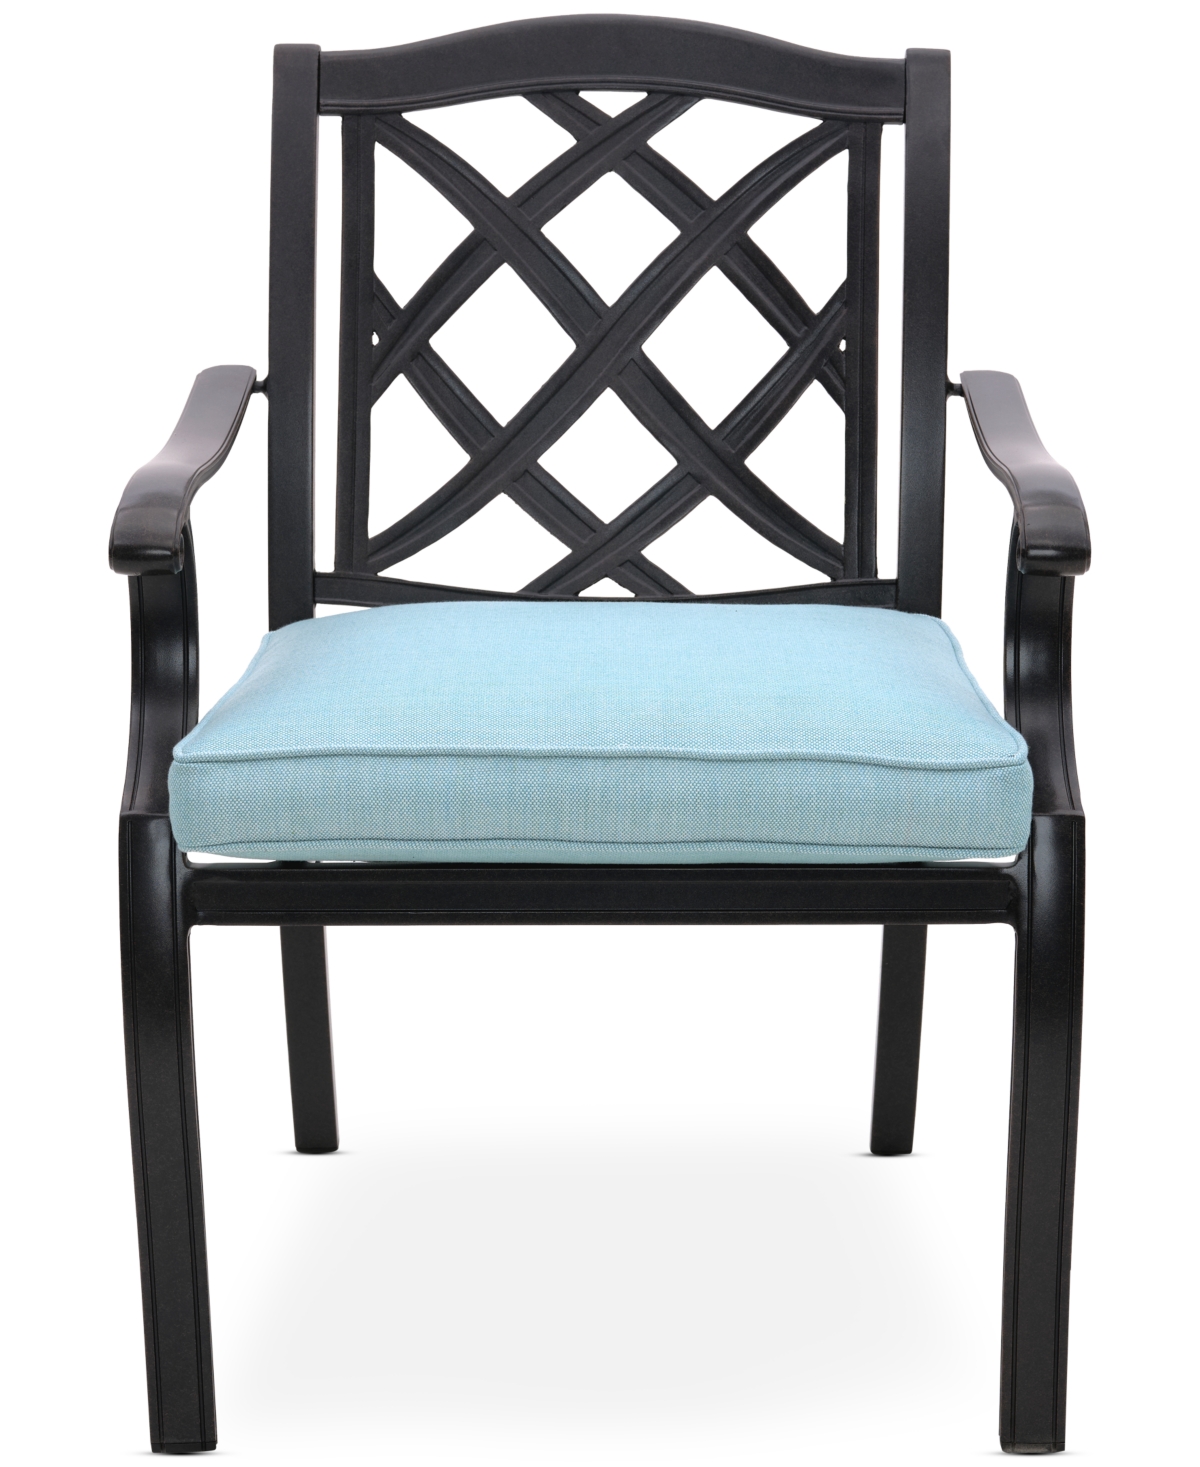 Agio Wythburn Mix And Match Lattice Outdoor Dining Chair In Spa Light Blue,pewter Finish